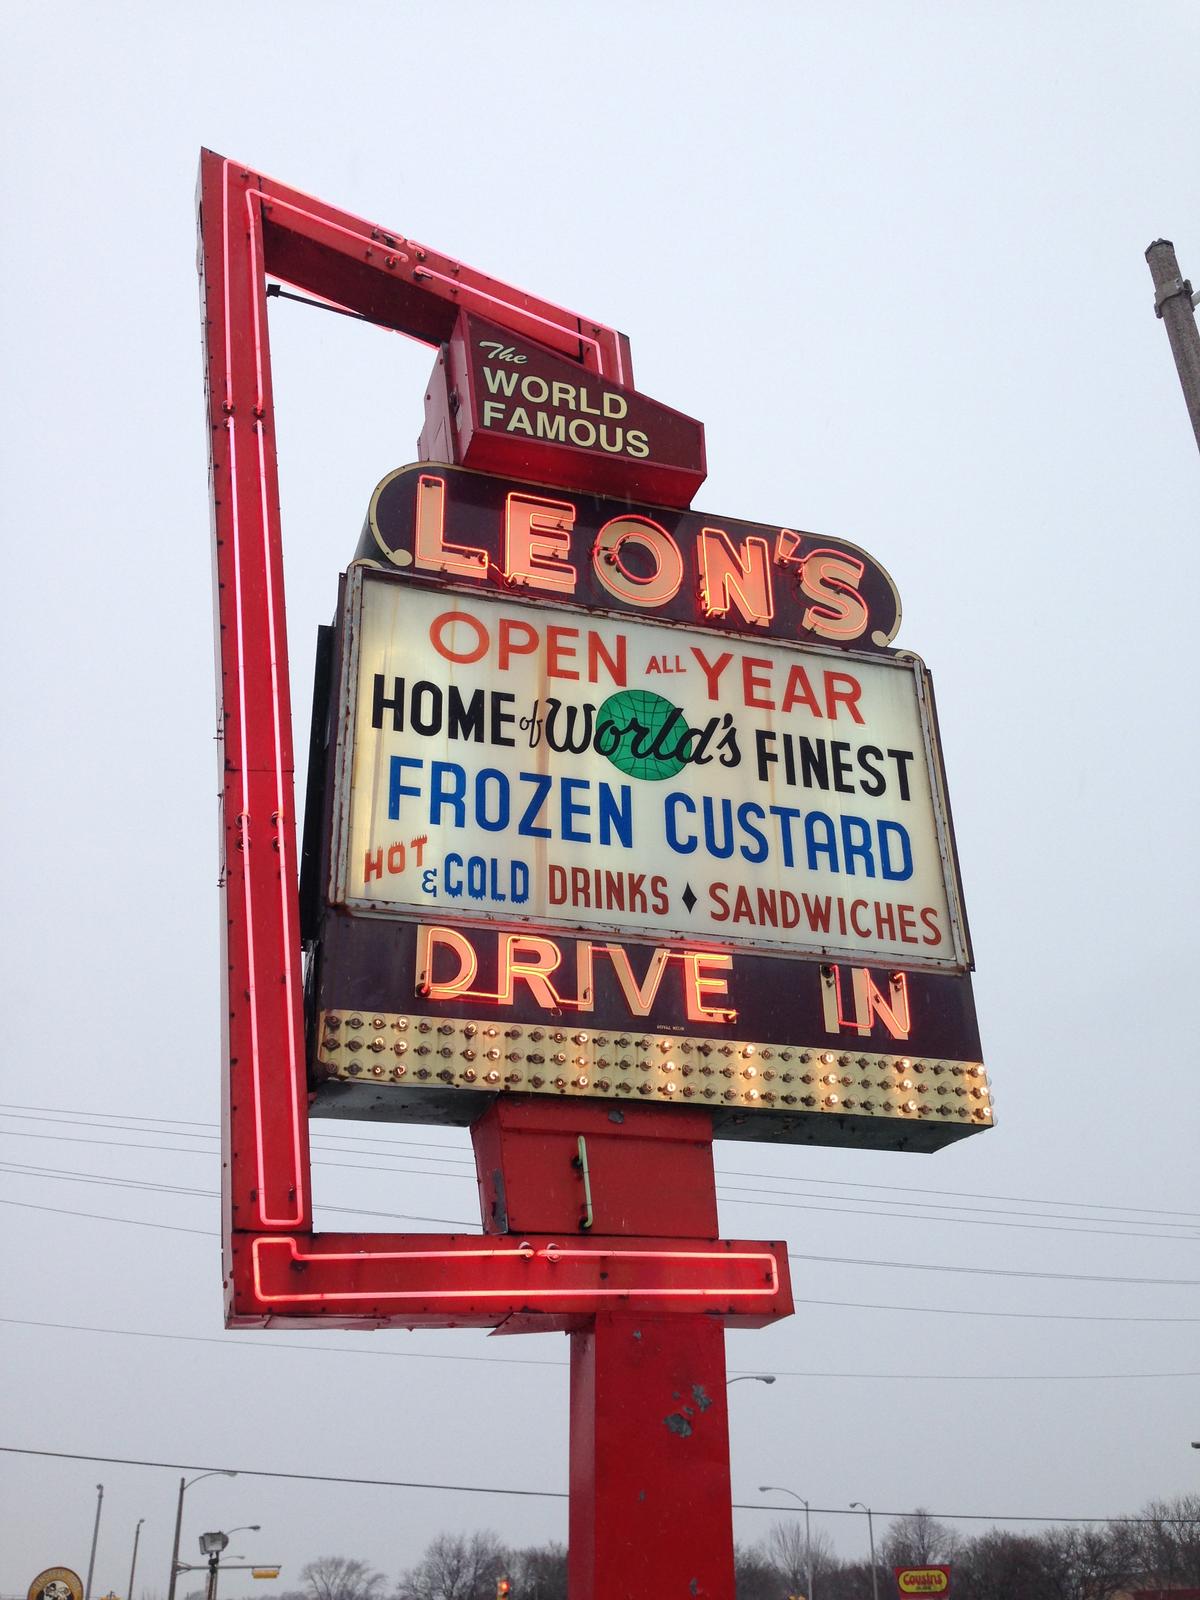 A sign for Leon's frozen custard. (victorgrigas/CC BY-SA 3.0)